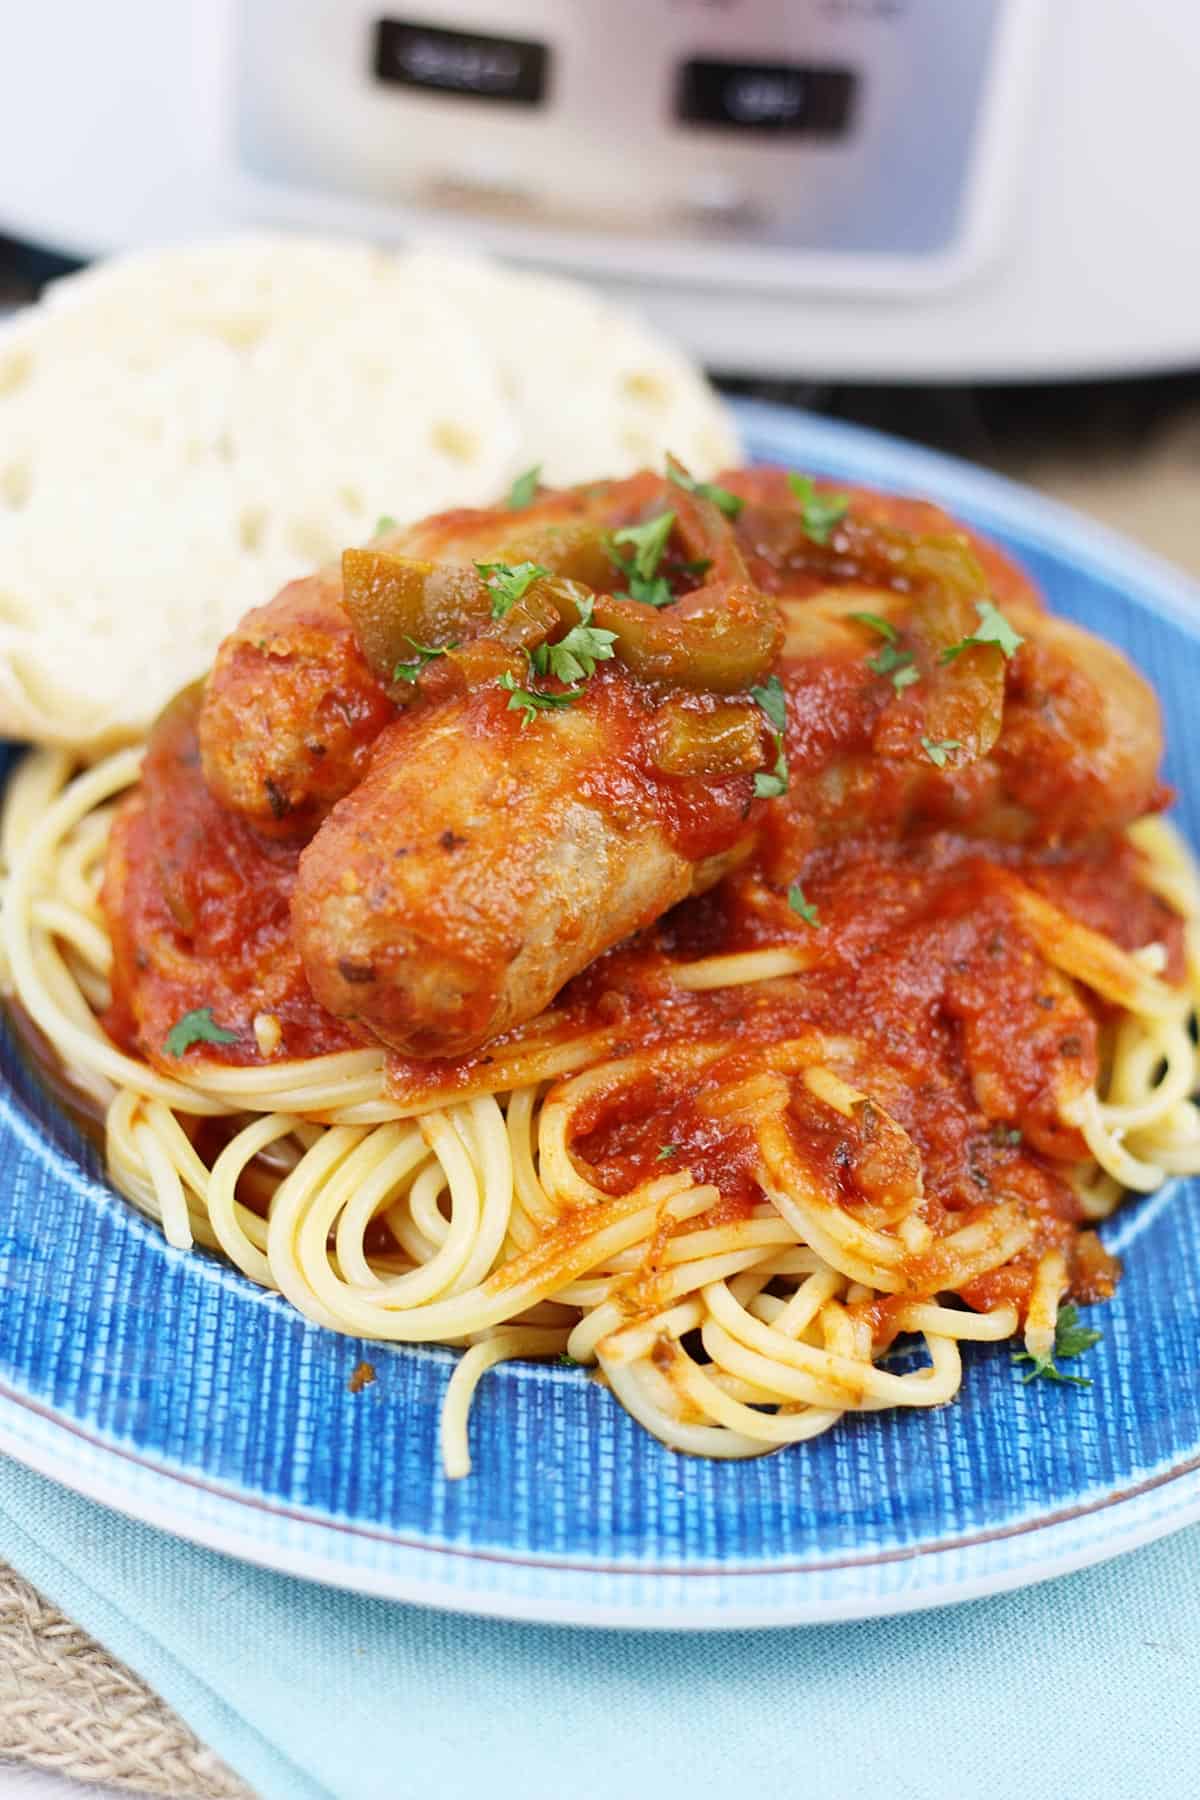 Cooked Italian sausage on a blue plate with spaghetti.